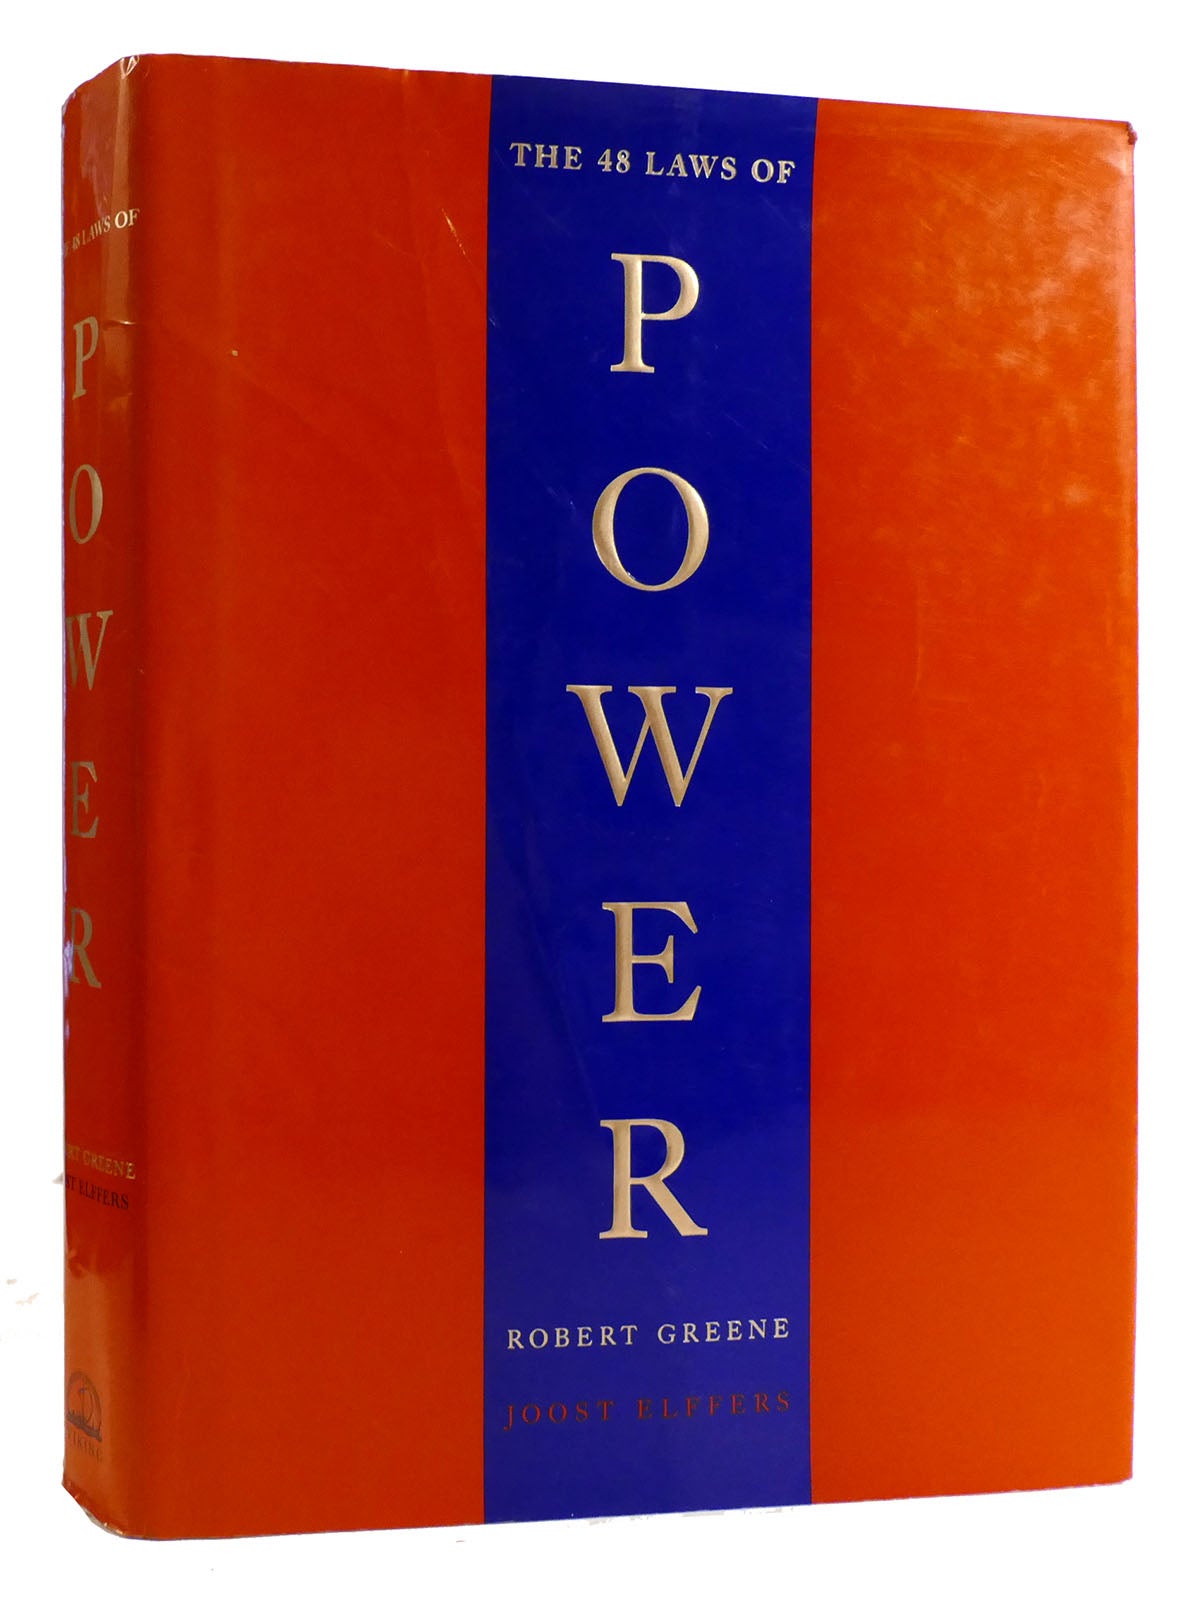 Buy 'The 48 Laws Of Power' Book In Excellent Condition At Clankart